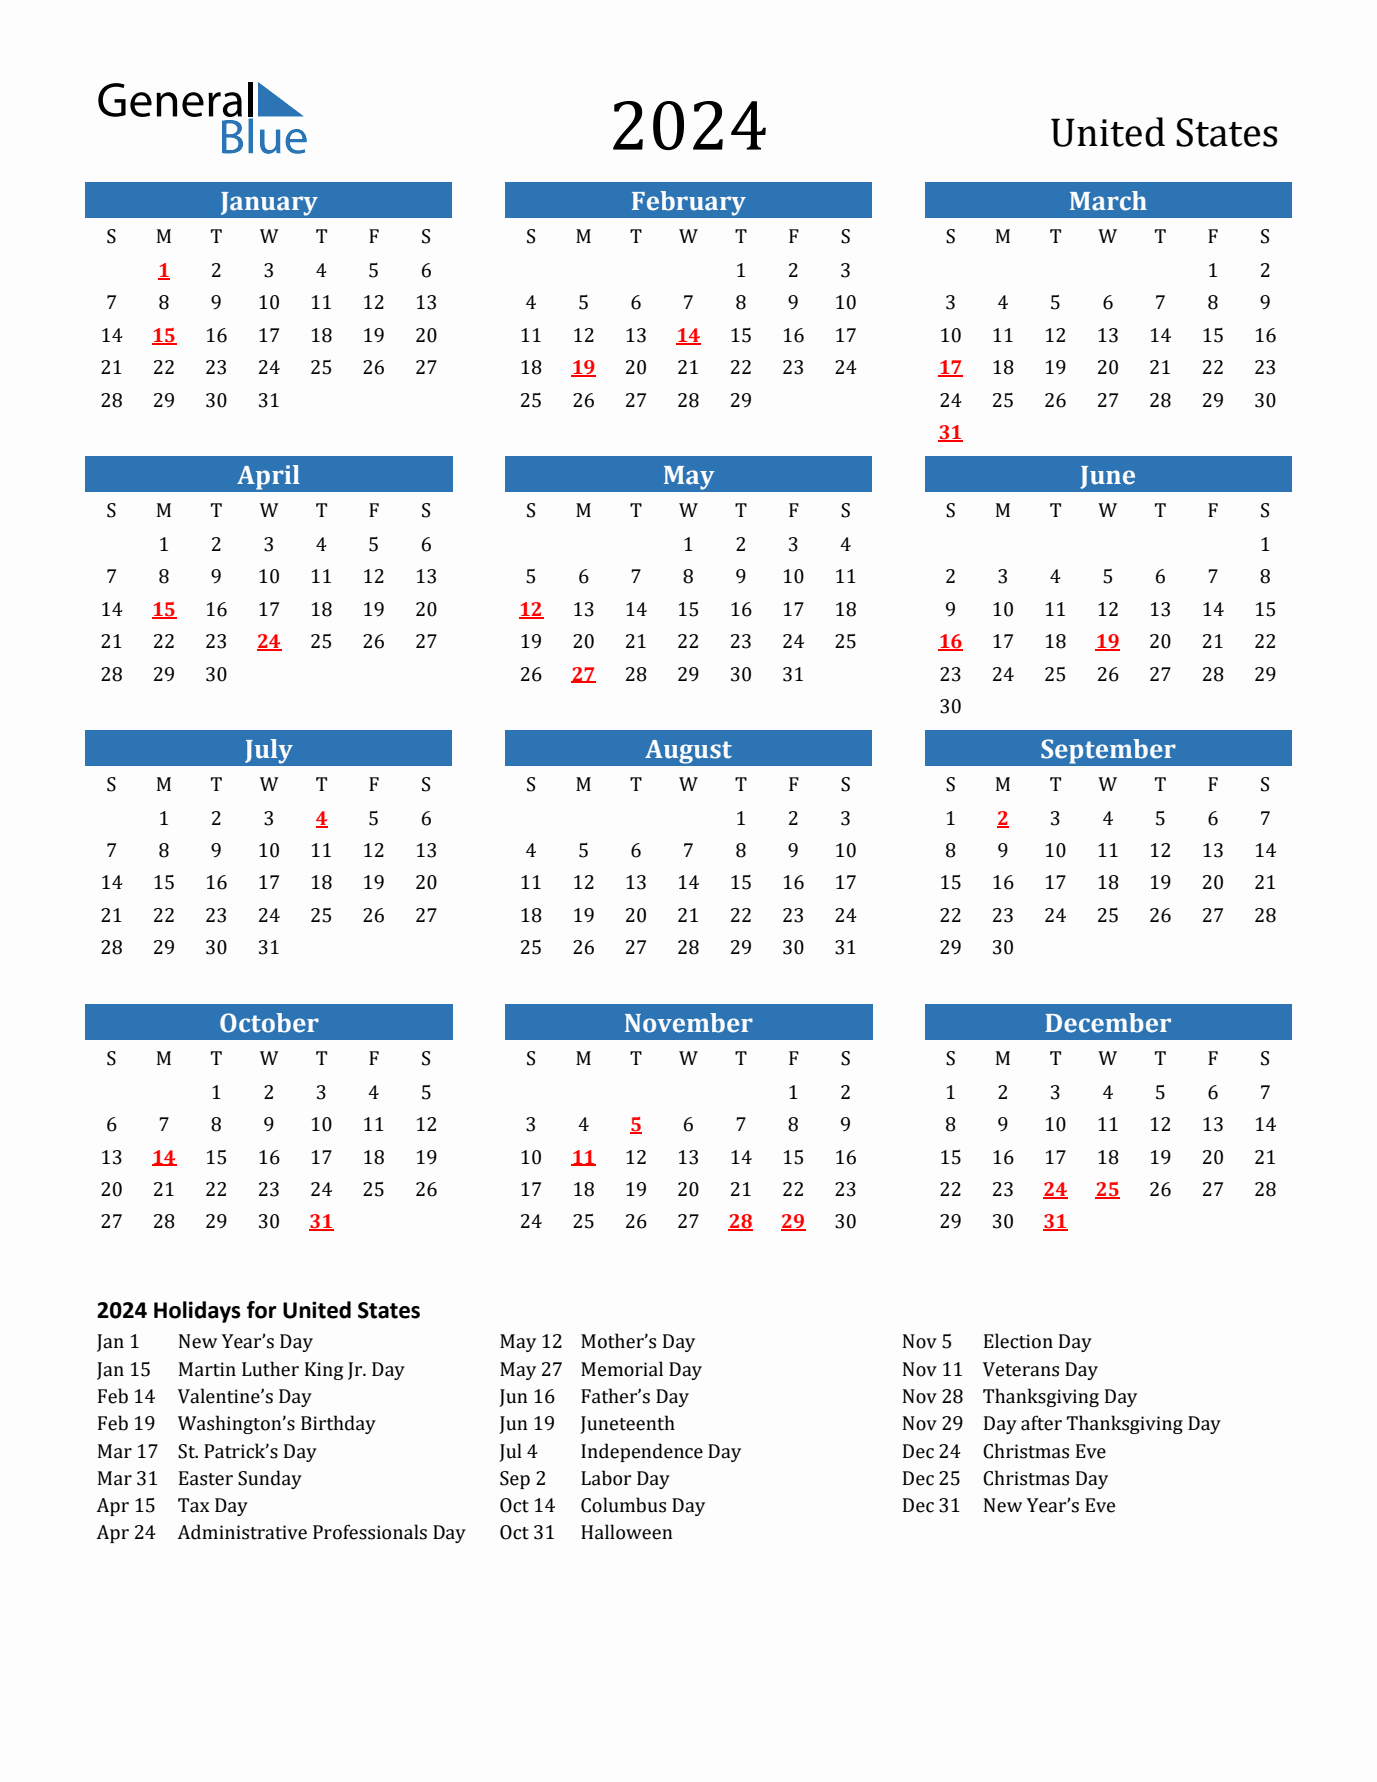 2024 yearly calendar with United States holidays